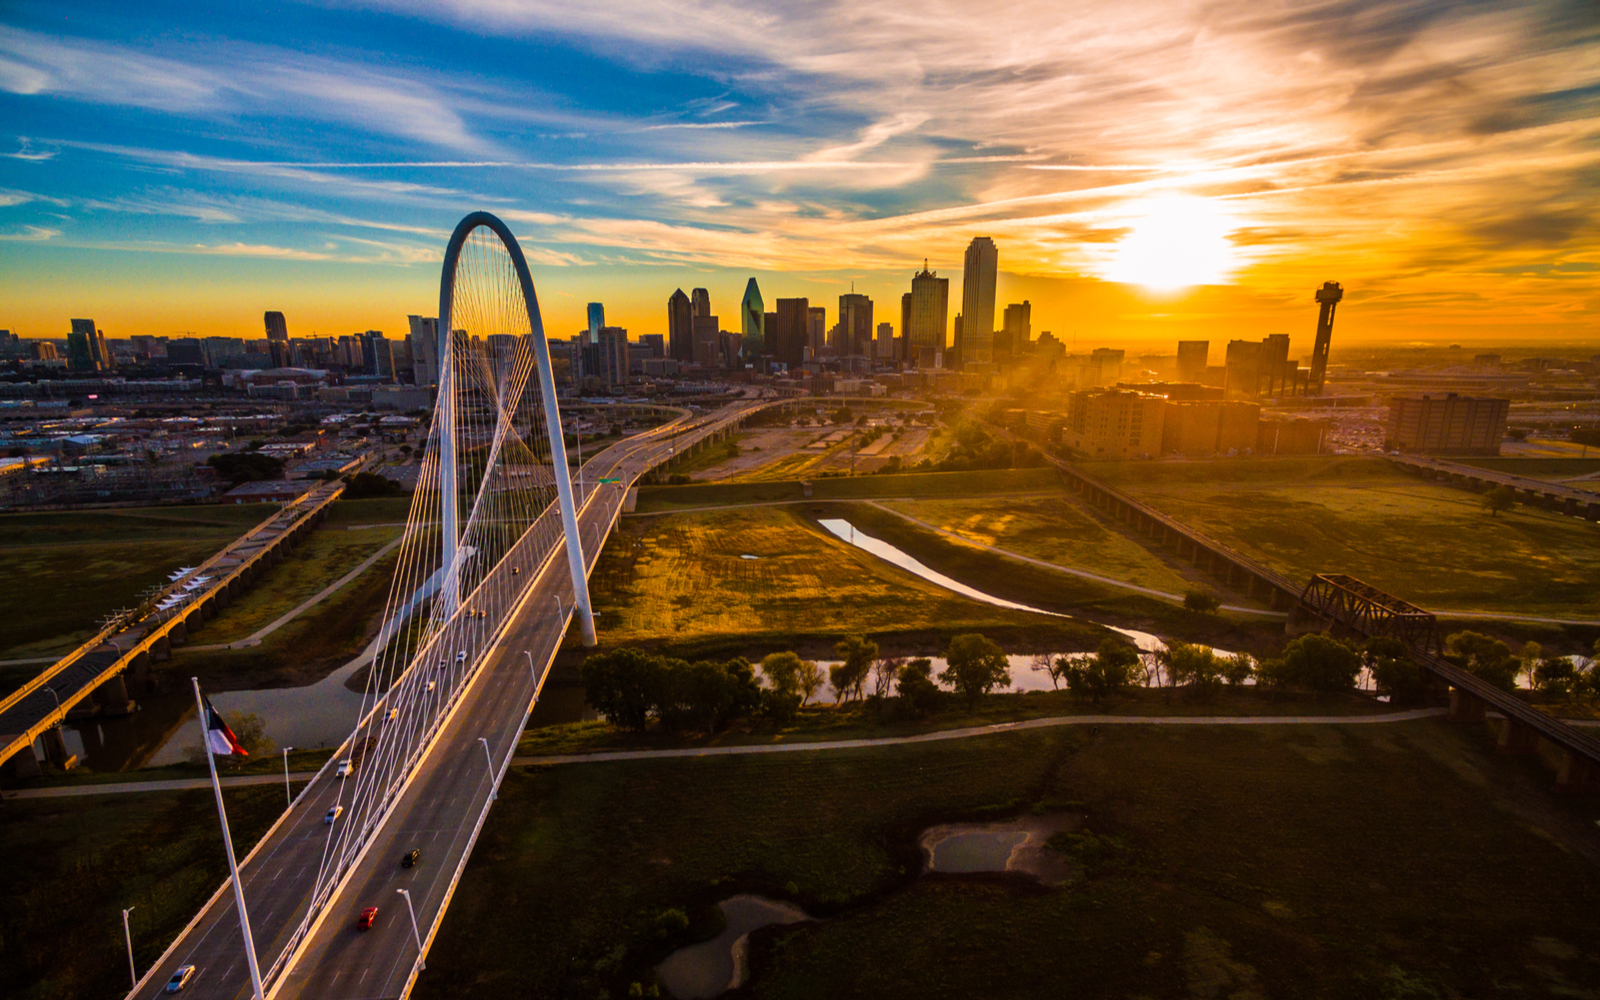 Best hotels in Dallas featured image showing a bridge and the skyline of downtown